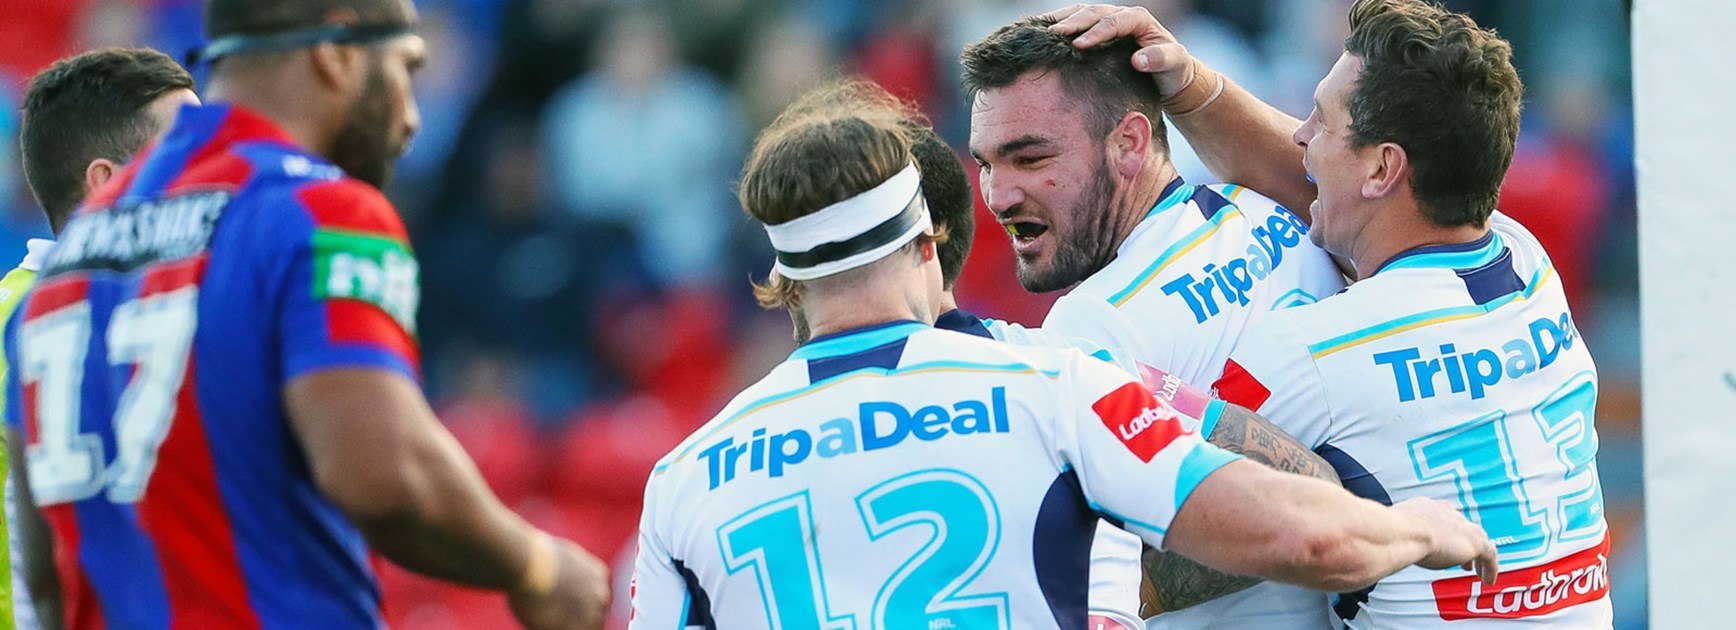 Titans prop Luke Douglas scored a try against the Knights in Round 24.